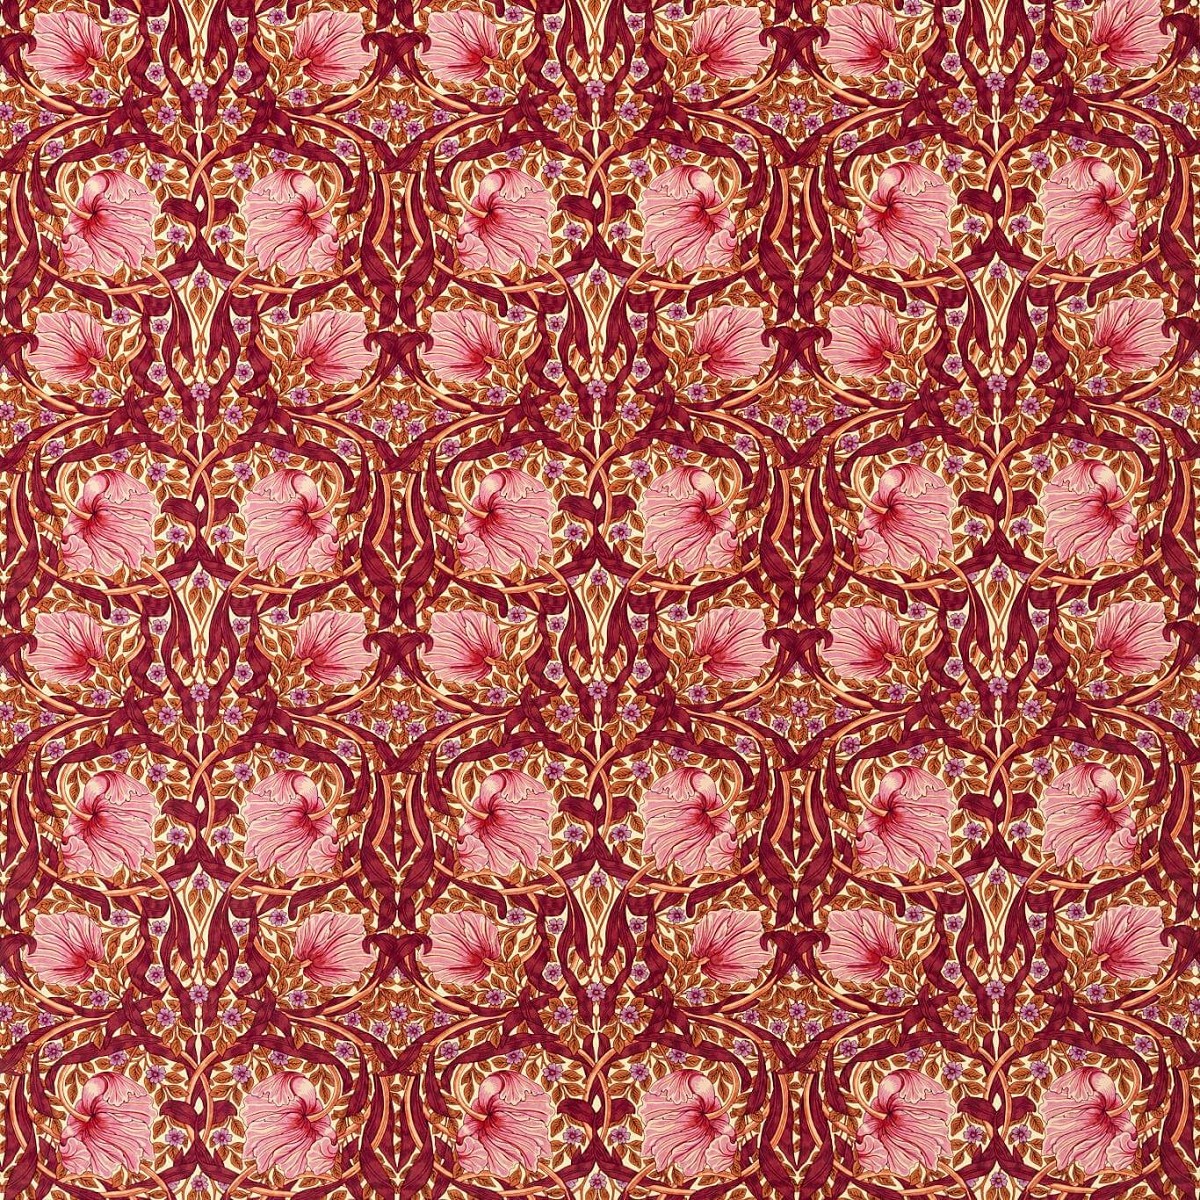 Pimpernel Sunset Boulevard Fabric by William Morris & Co.